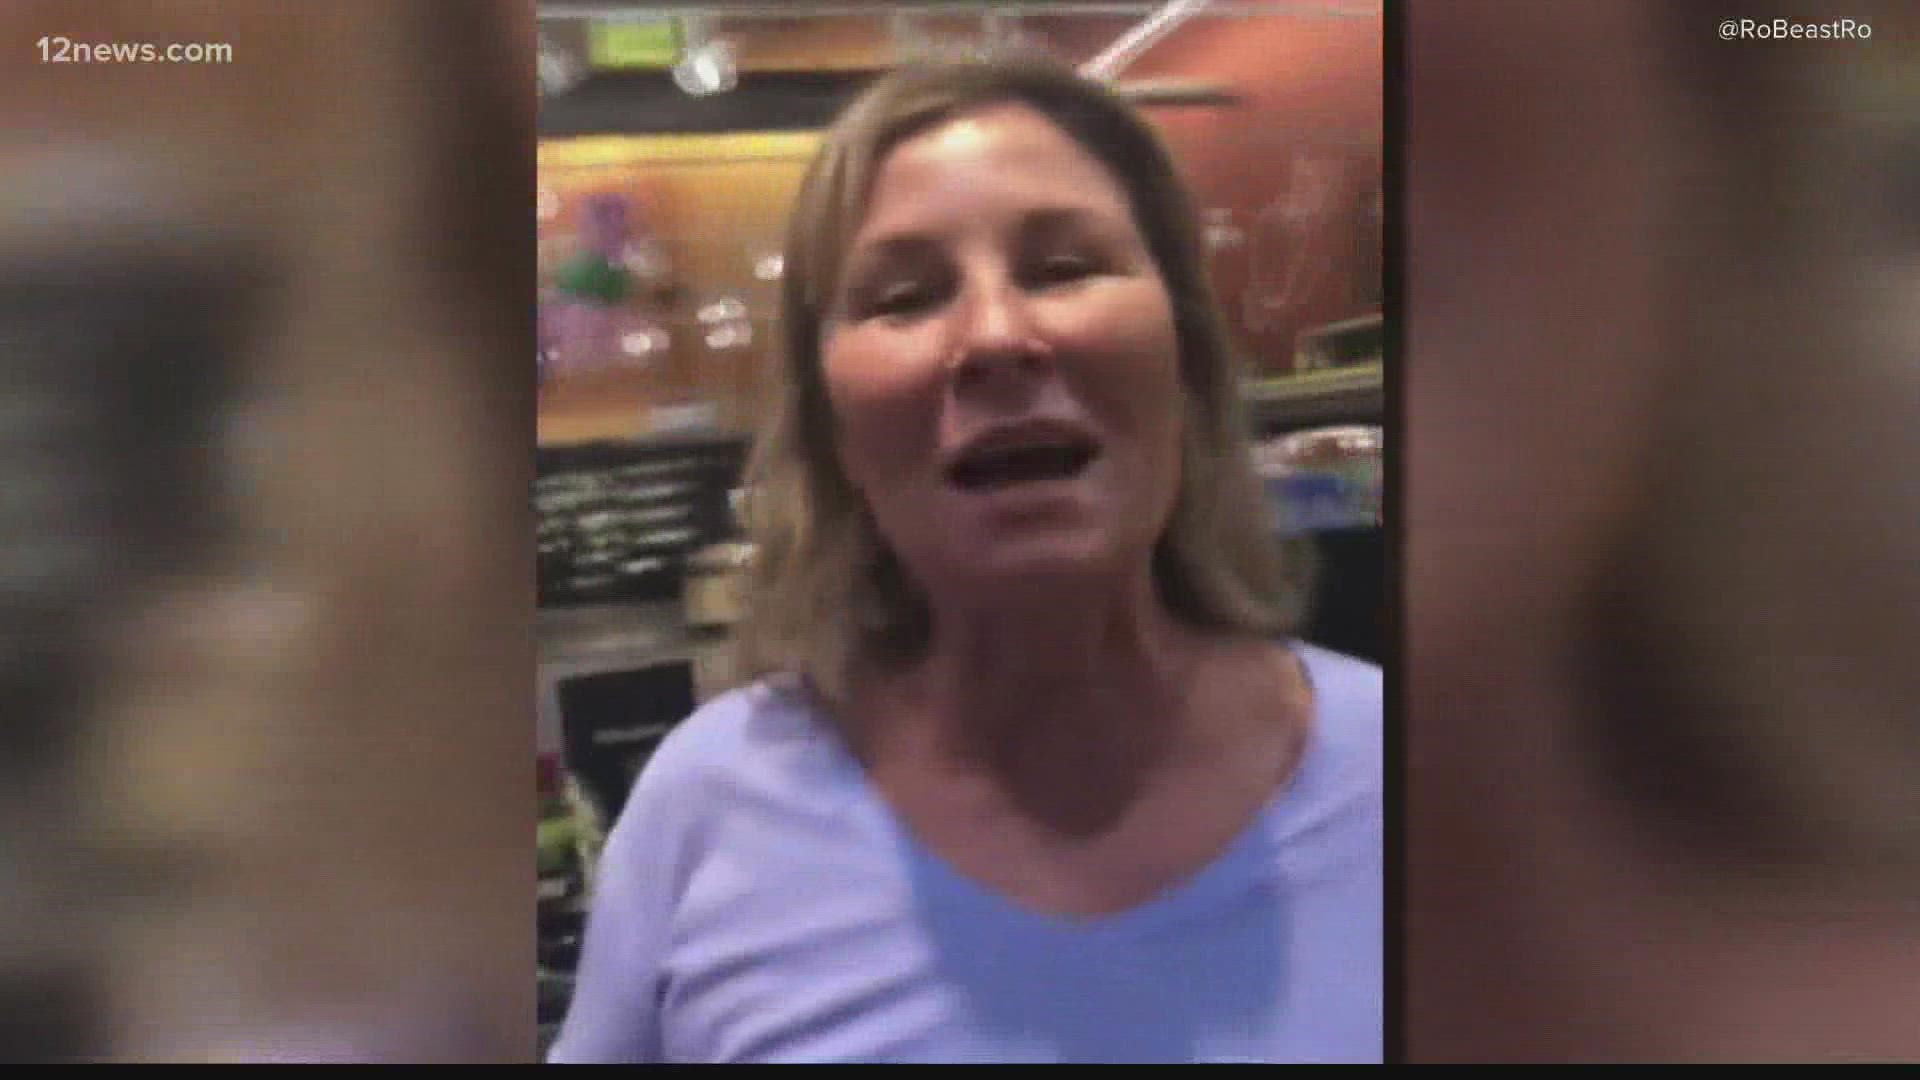 A Scottsdale woman was caught on camera intentionally coughing at customers at a grocery store.